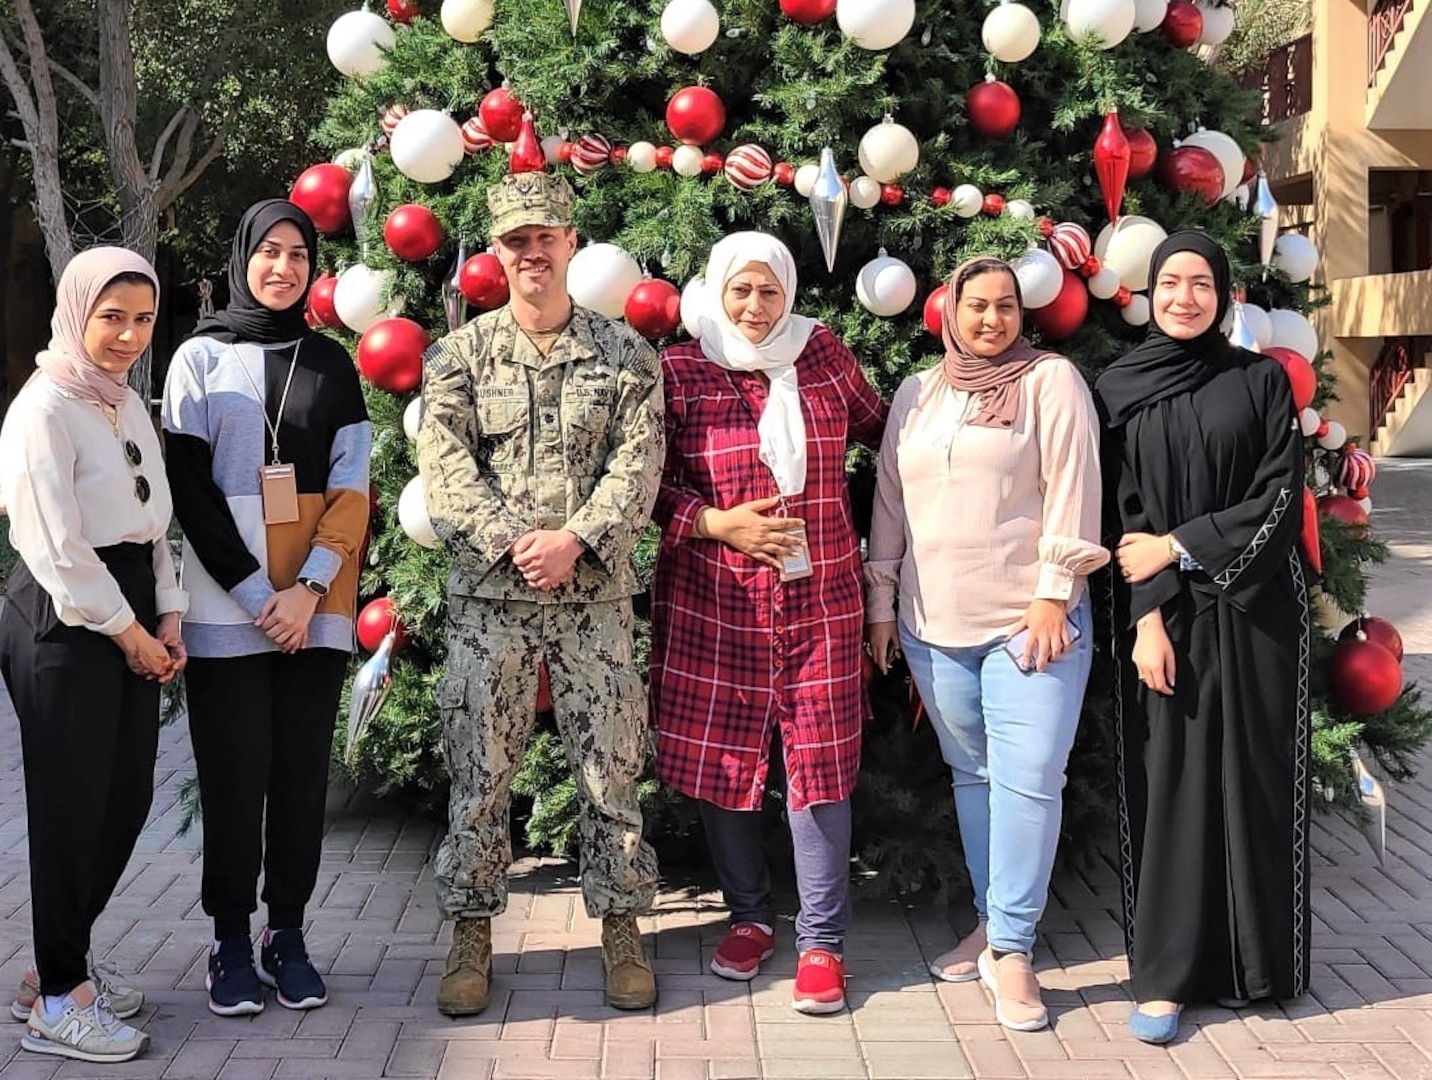 BAHRAIN (Dec. 1, 2021)  Cmdr. Adam Kushner, Public Works Officer, Public Works Department, Naval Support Activity, Bahrain poses with five of the six PWD Bahrain female employees in celebration of Bahraini Women’s Day, Dec. 1.  This is the 20th anniversary of the celebration that commemorates the achievements and creative contribution made by women to the development and progress of Bahrain.  Joining Kushner in the photo, from left to right, are Ms. Mariam Ghuloom, Engineering Technician, Facilities Support Contracts Branch; Ms. Hawra Abu-Idrees, Management and Program Assistant, Environmental Division; Cmdr. Kushner; Ms. Layla Turabi, Chemical Engineer, Potable Water Manager, Environmental Division and Ms. Maryam Haider, Host Nation Community Planner.  Unfortunately, Ms. Nada Ghazwan, Procurement Technician, Contracting Department was not available to appear in the photo.  Naval Facilities Engineering Systems Command, Europe, Africa, Central, Public Works Department, Naval Support Activity Bahrain enables mission support to personnel and operational assets within the Navy Central Command/5th FLEET Area of Responsibility through deliberate planning and execution of installation facility support requirements.  (U.S. Navy photo by Construction Electrician 2nd Class Quenniemay Galarpe/Released)